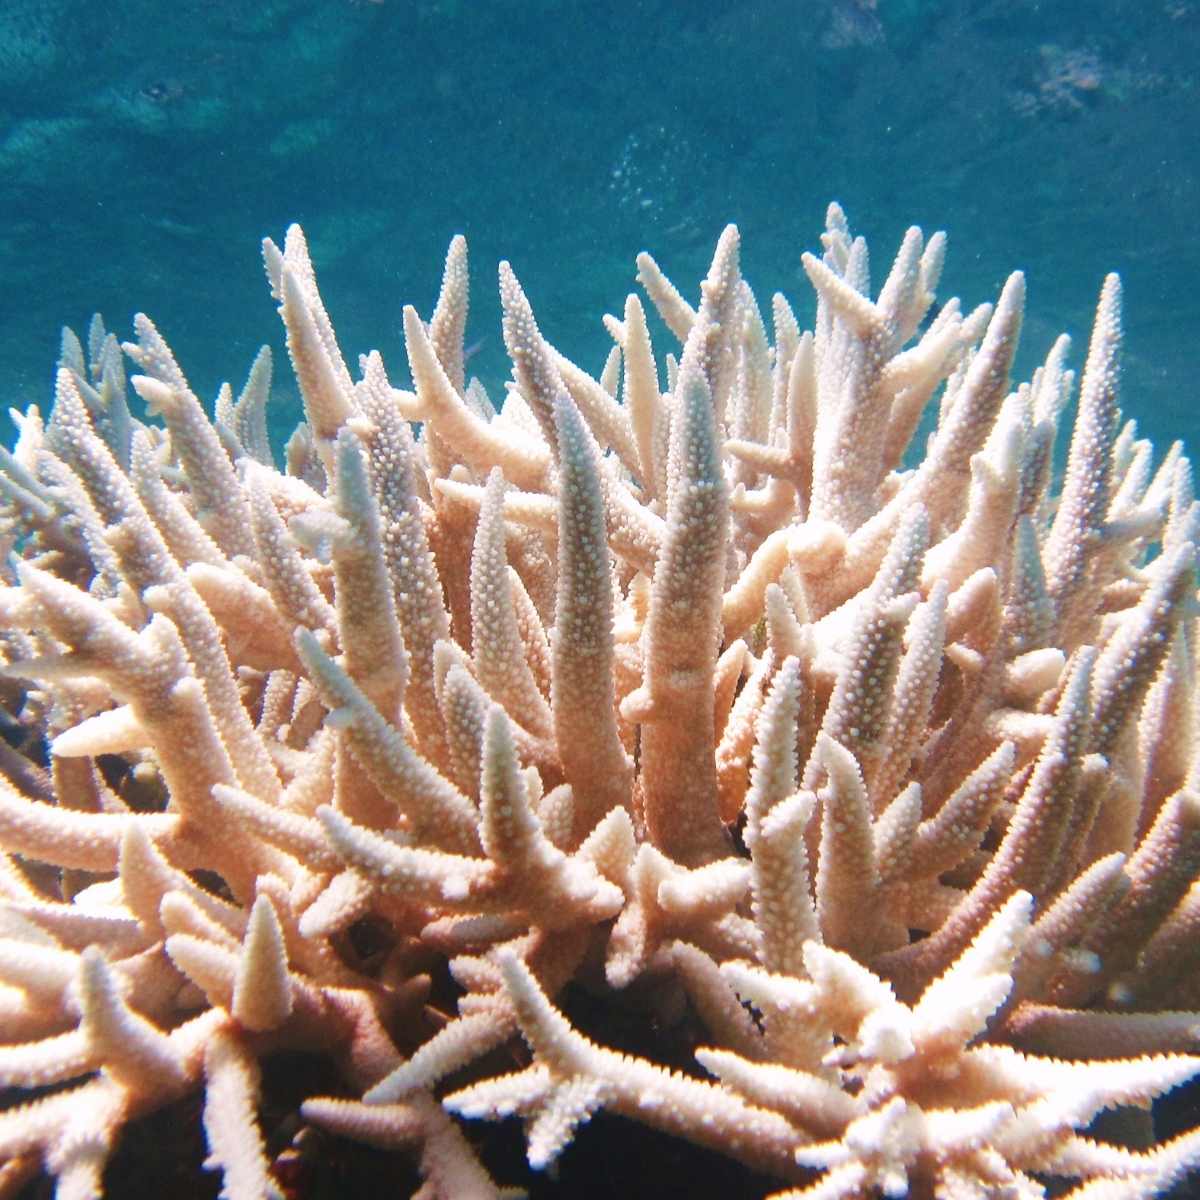 Bleached coral in the ocean.